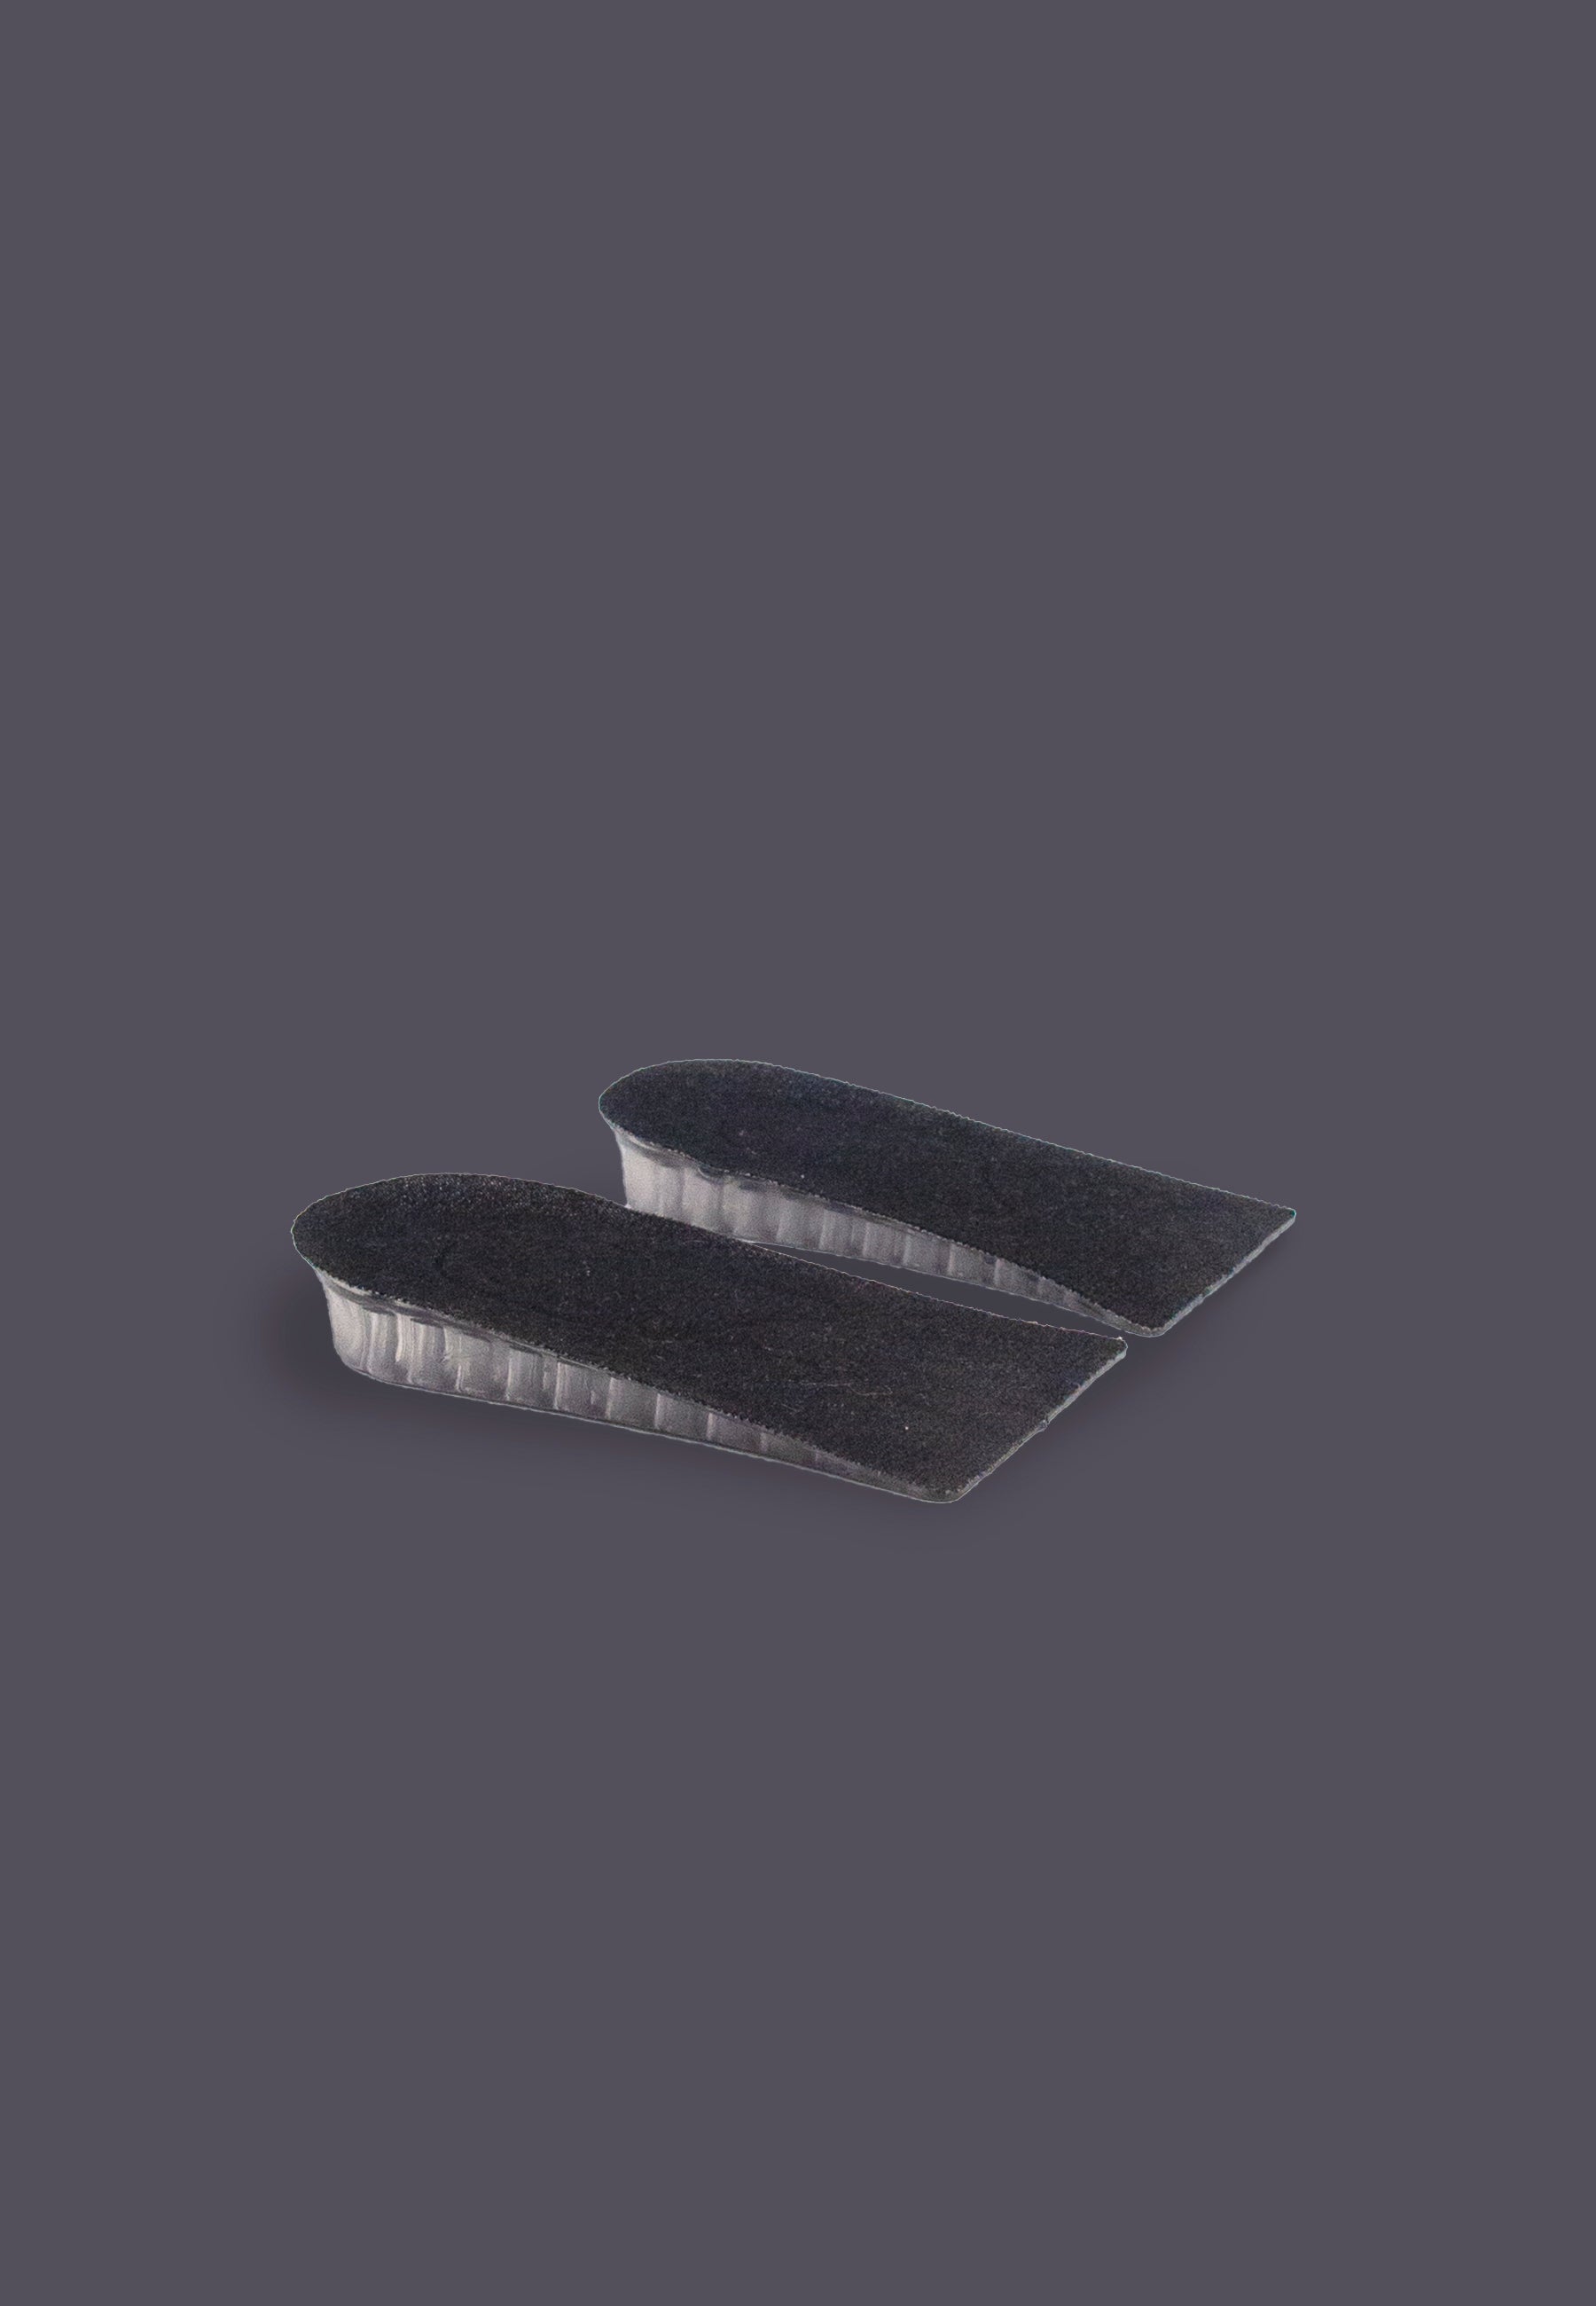 Gel Shoepads, one layer